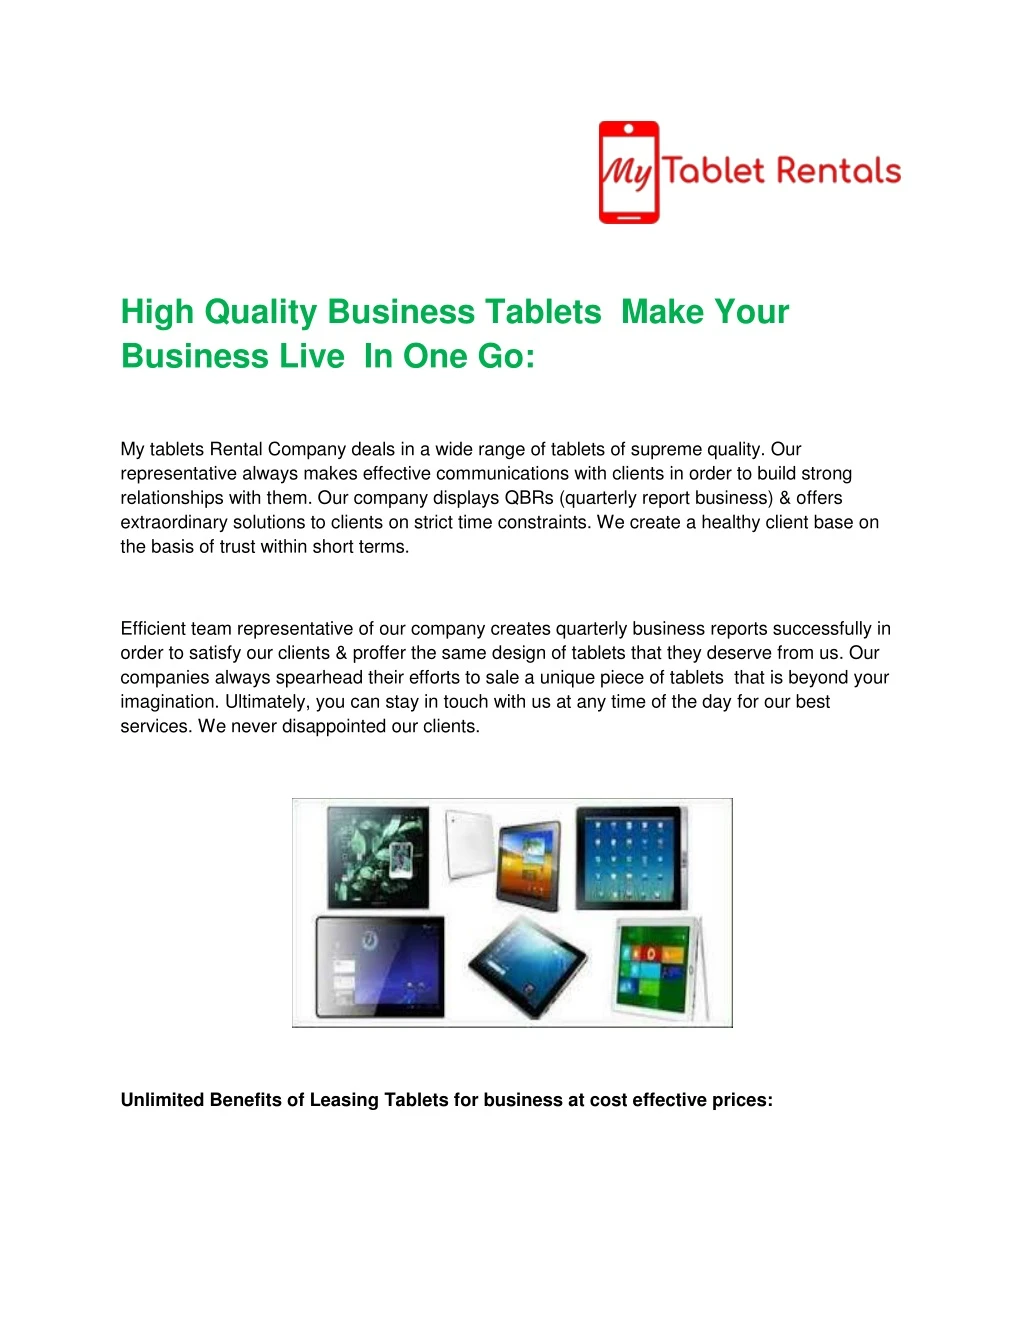 high quality business tablets make your business